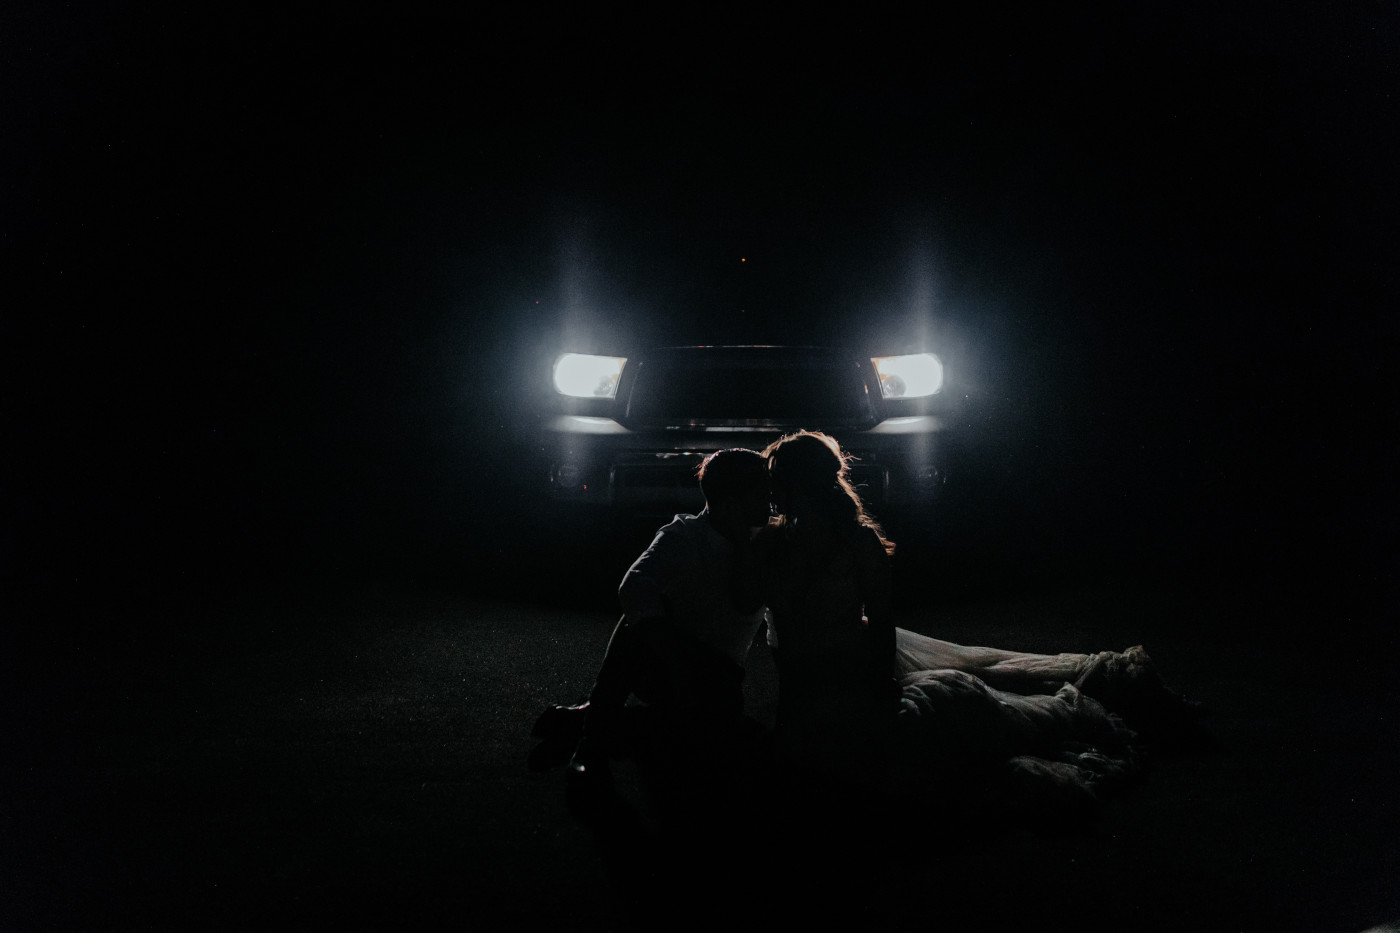 Zack and Shelby sit in front of the car headlights in the dark of Joshua Tree.